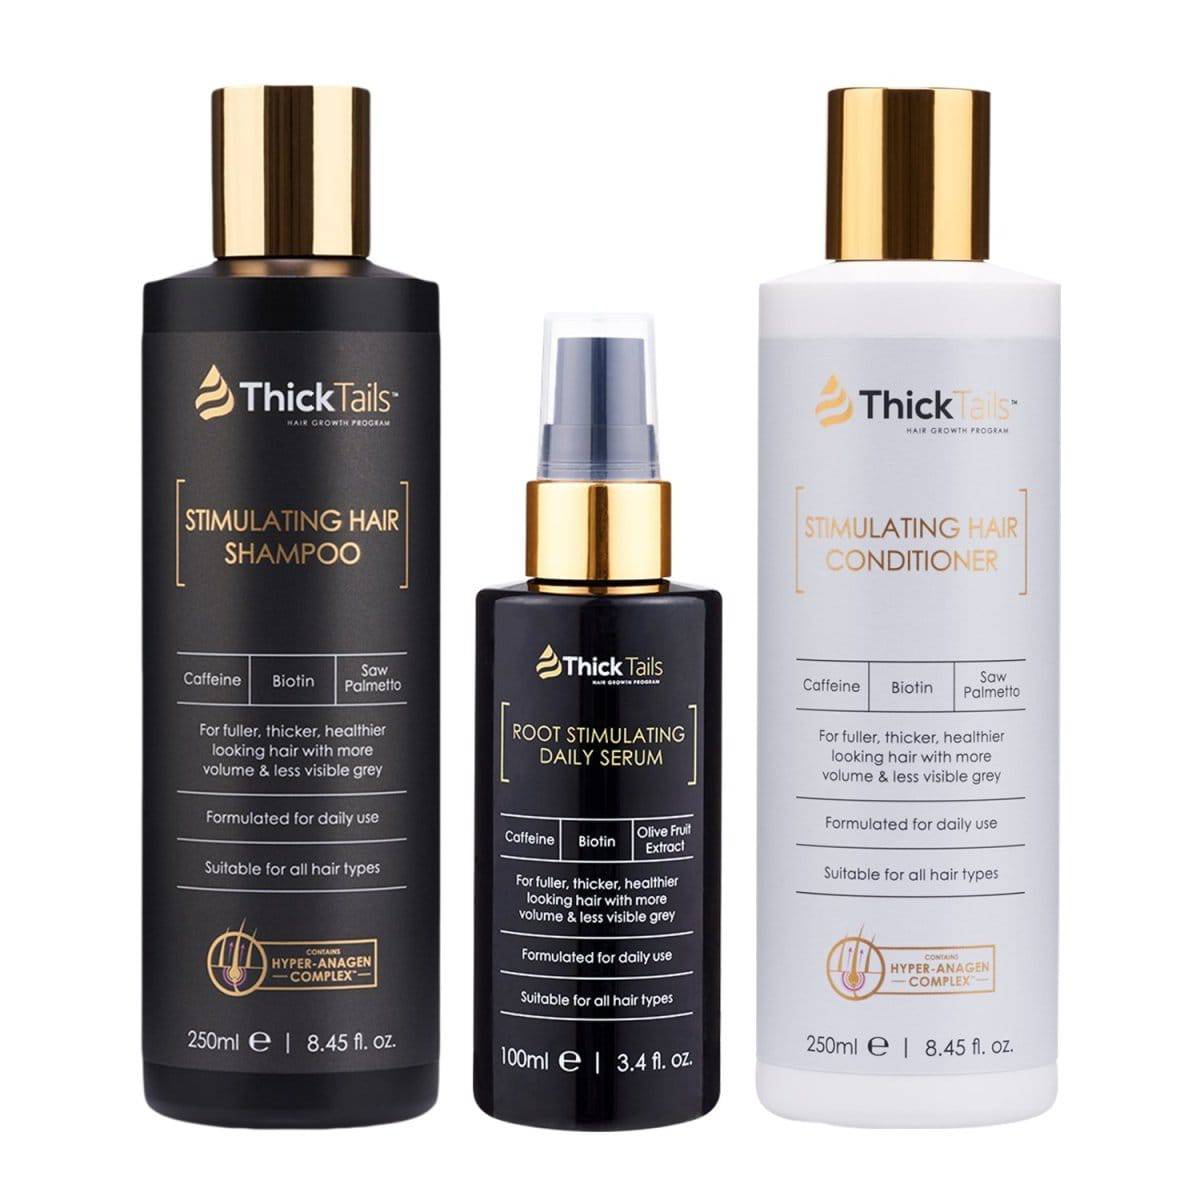 ThickTails Stimulating Hair Shampoo, Conditioner and Serum | For Women With Thinning Hair Breakage Due to Menopause